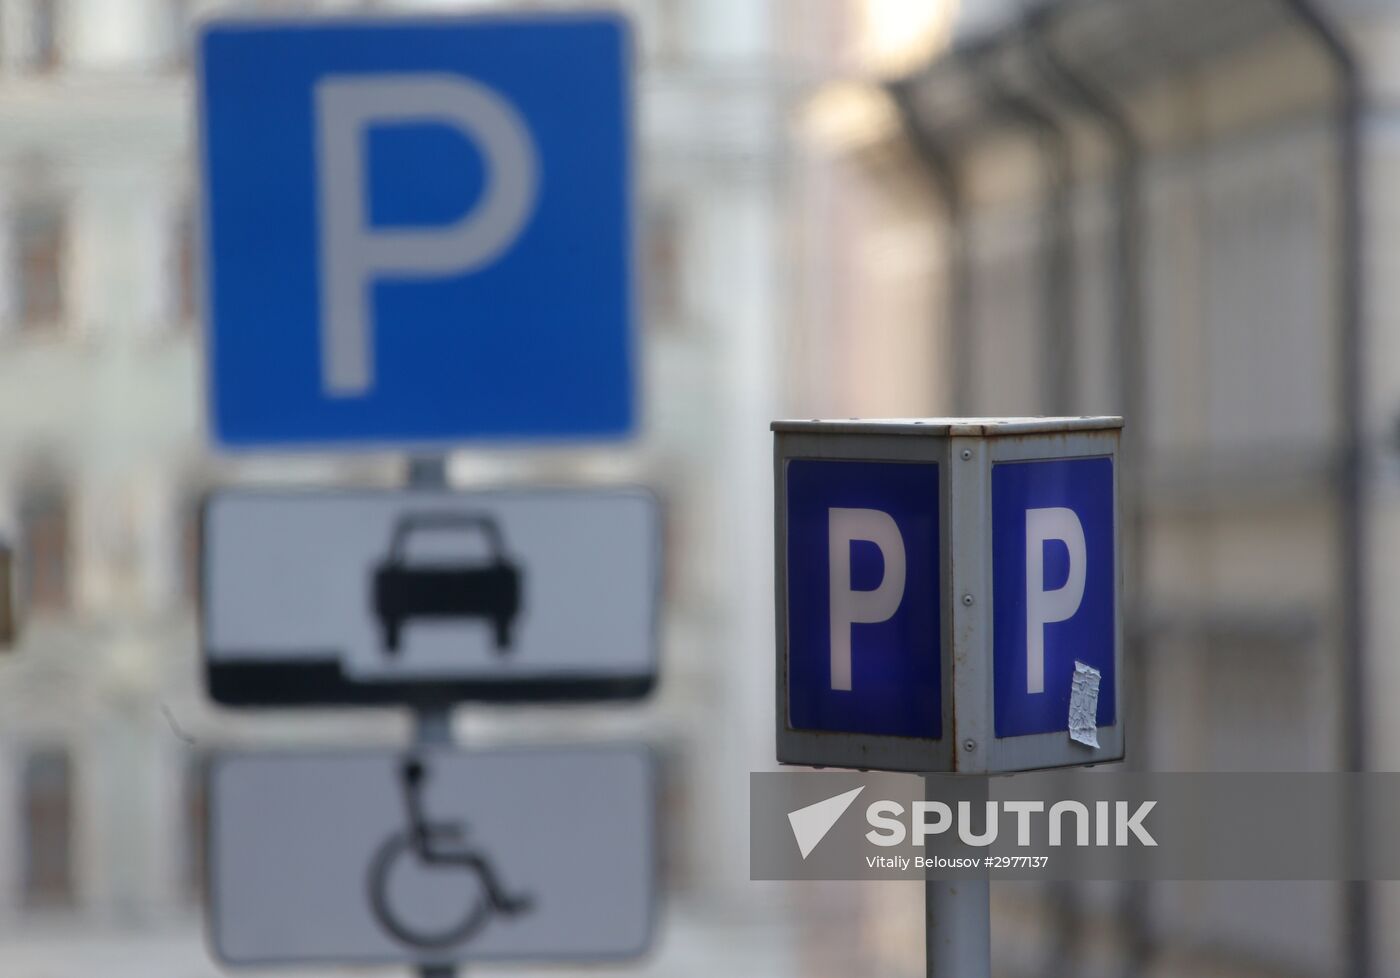 New parking rates in Moscow to take effect on December 2